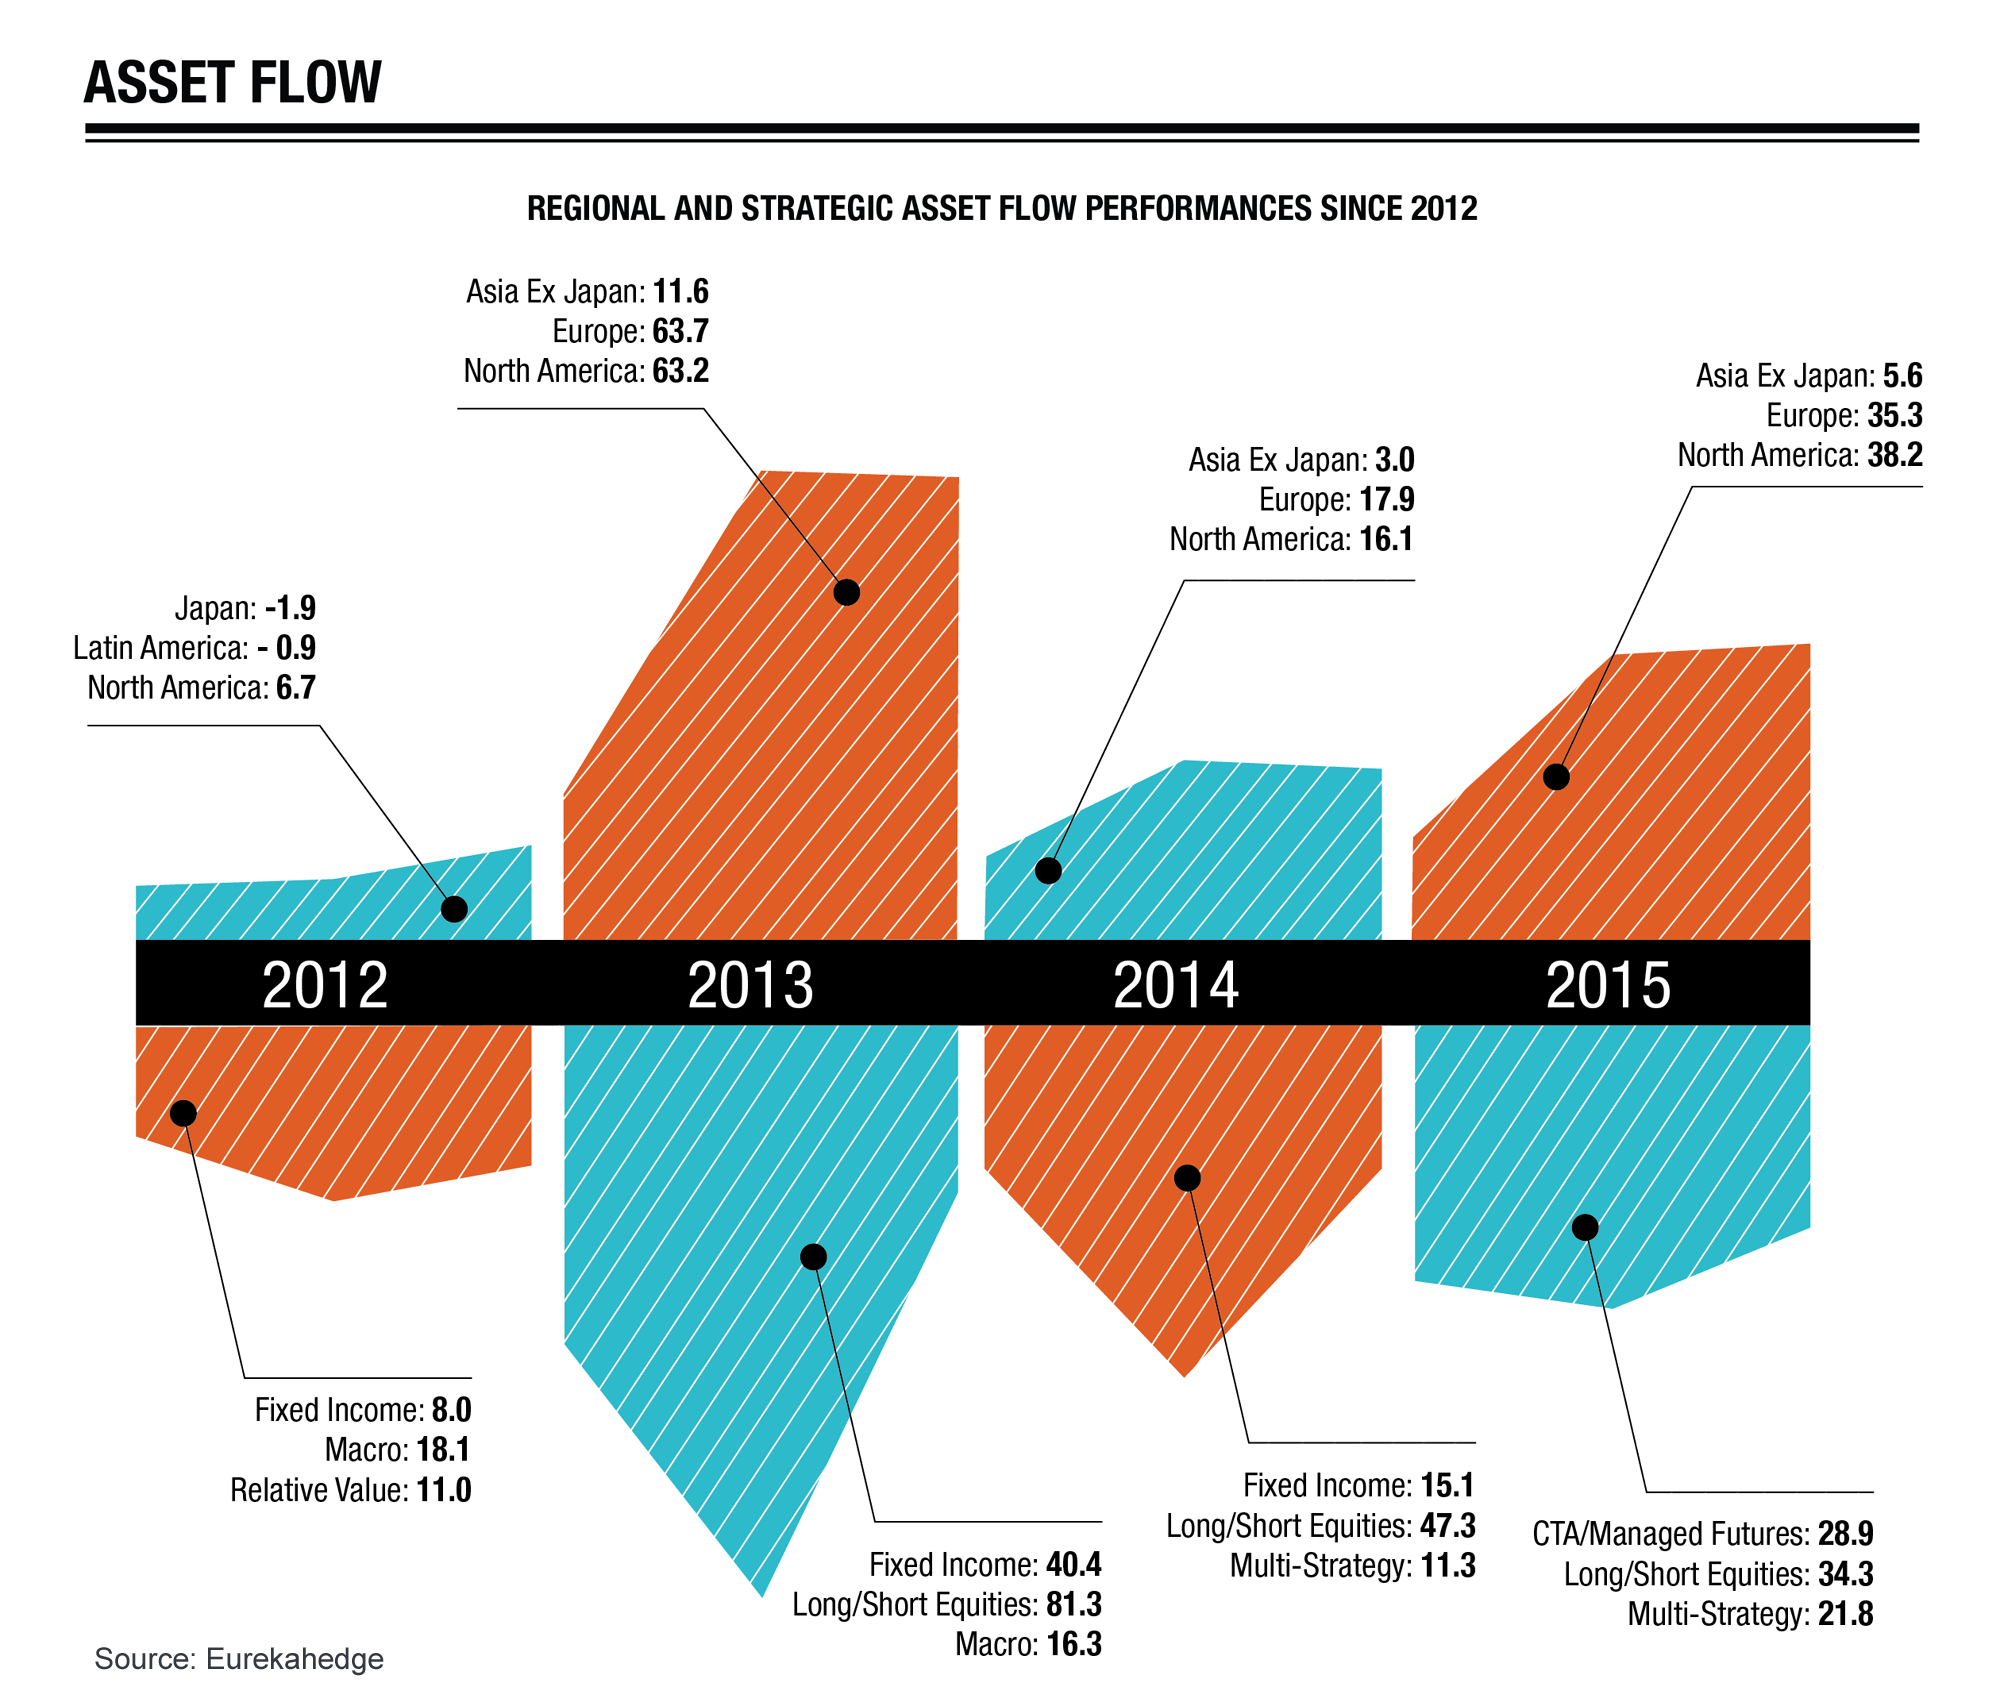 Hedge Funds 2015 Overview Infographic - Regional and strategic asset flow performance 2012 to 2015